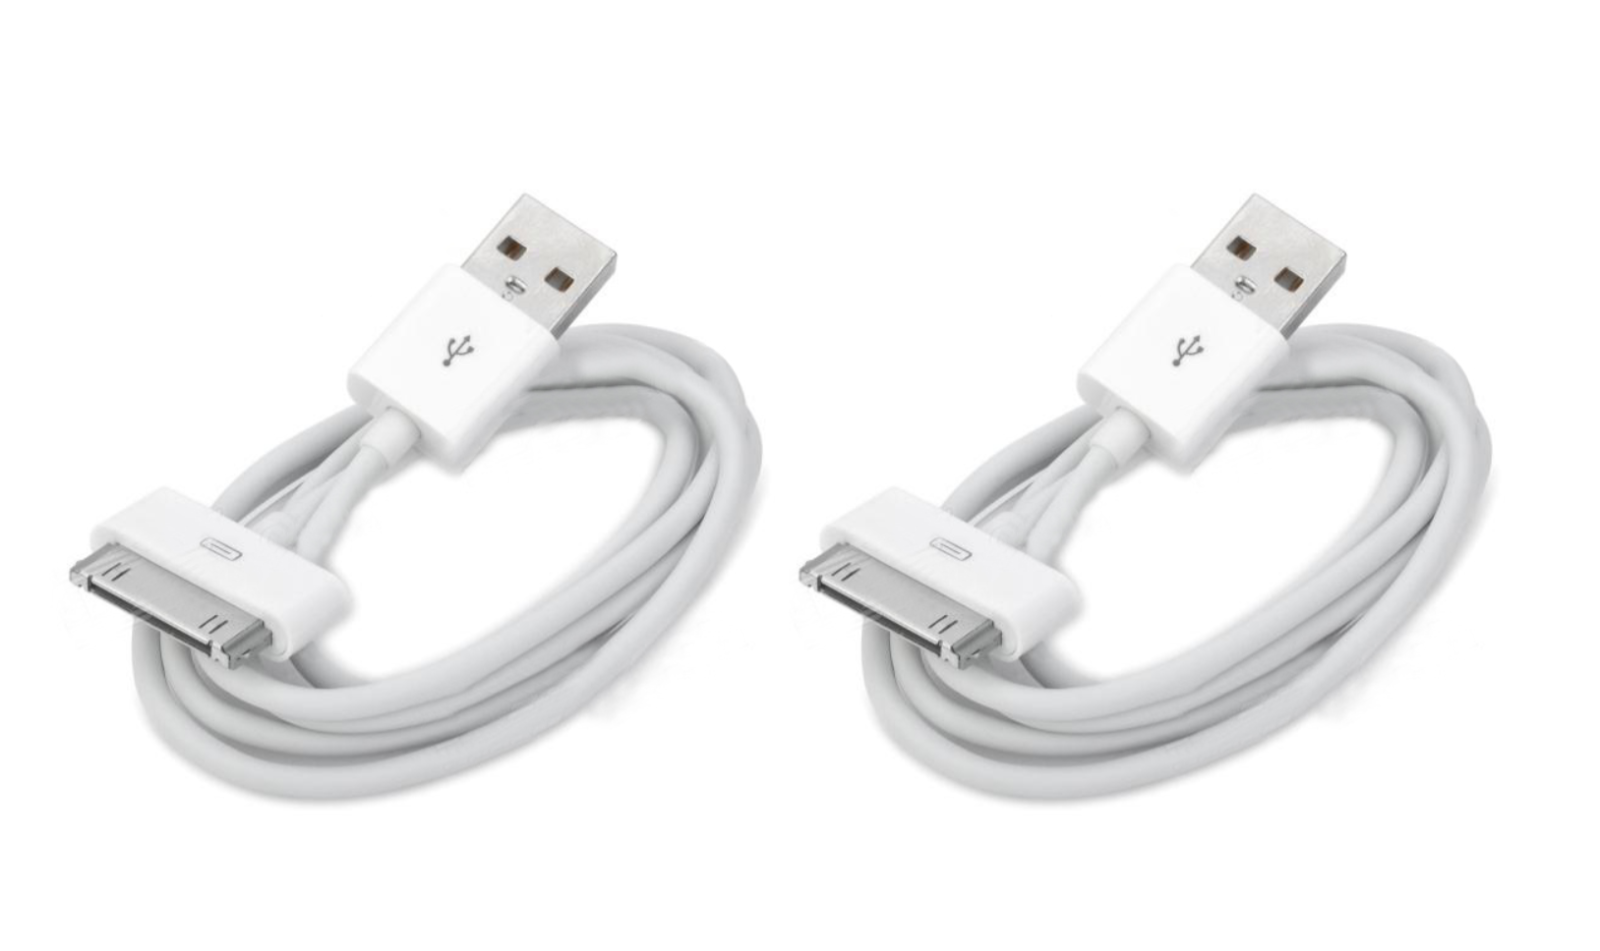 2X Sync Data Charging Charger USB Cable Cord for iPhone 3G 4 iPod Touch 4th Gen Generic(Not Apple) Does Not Apply